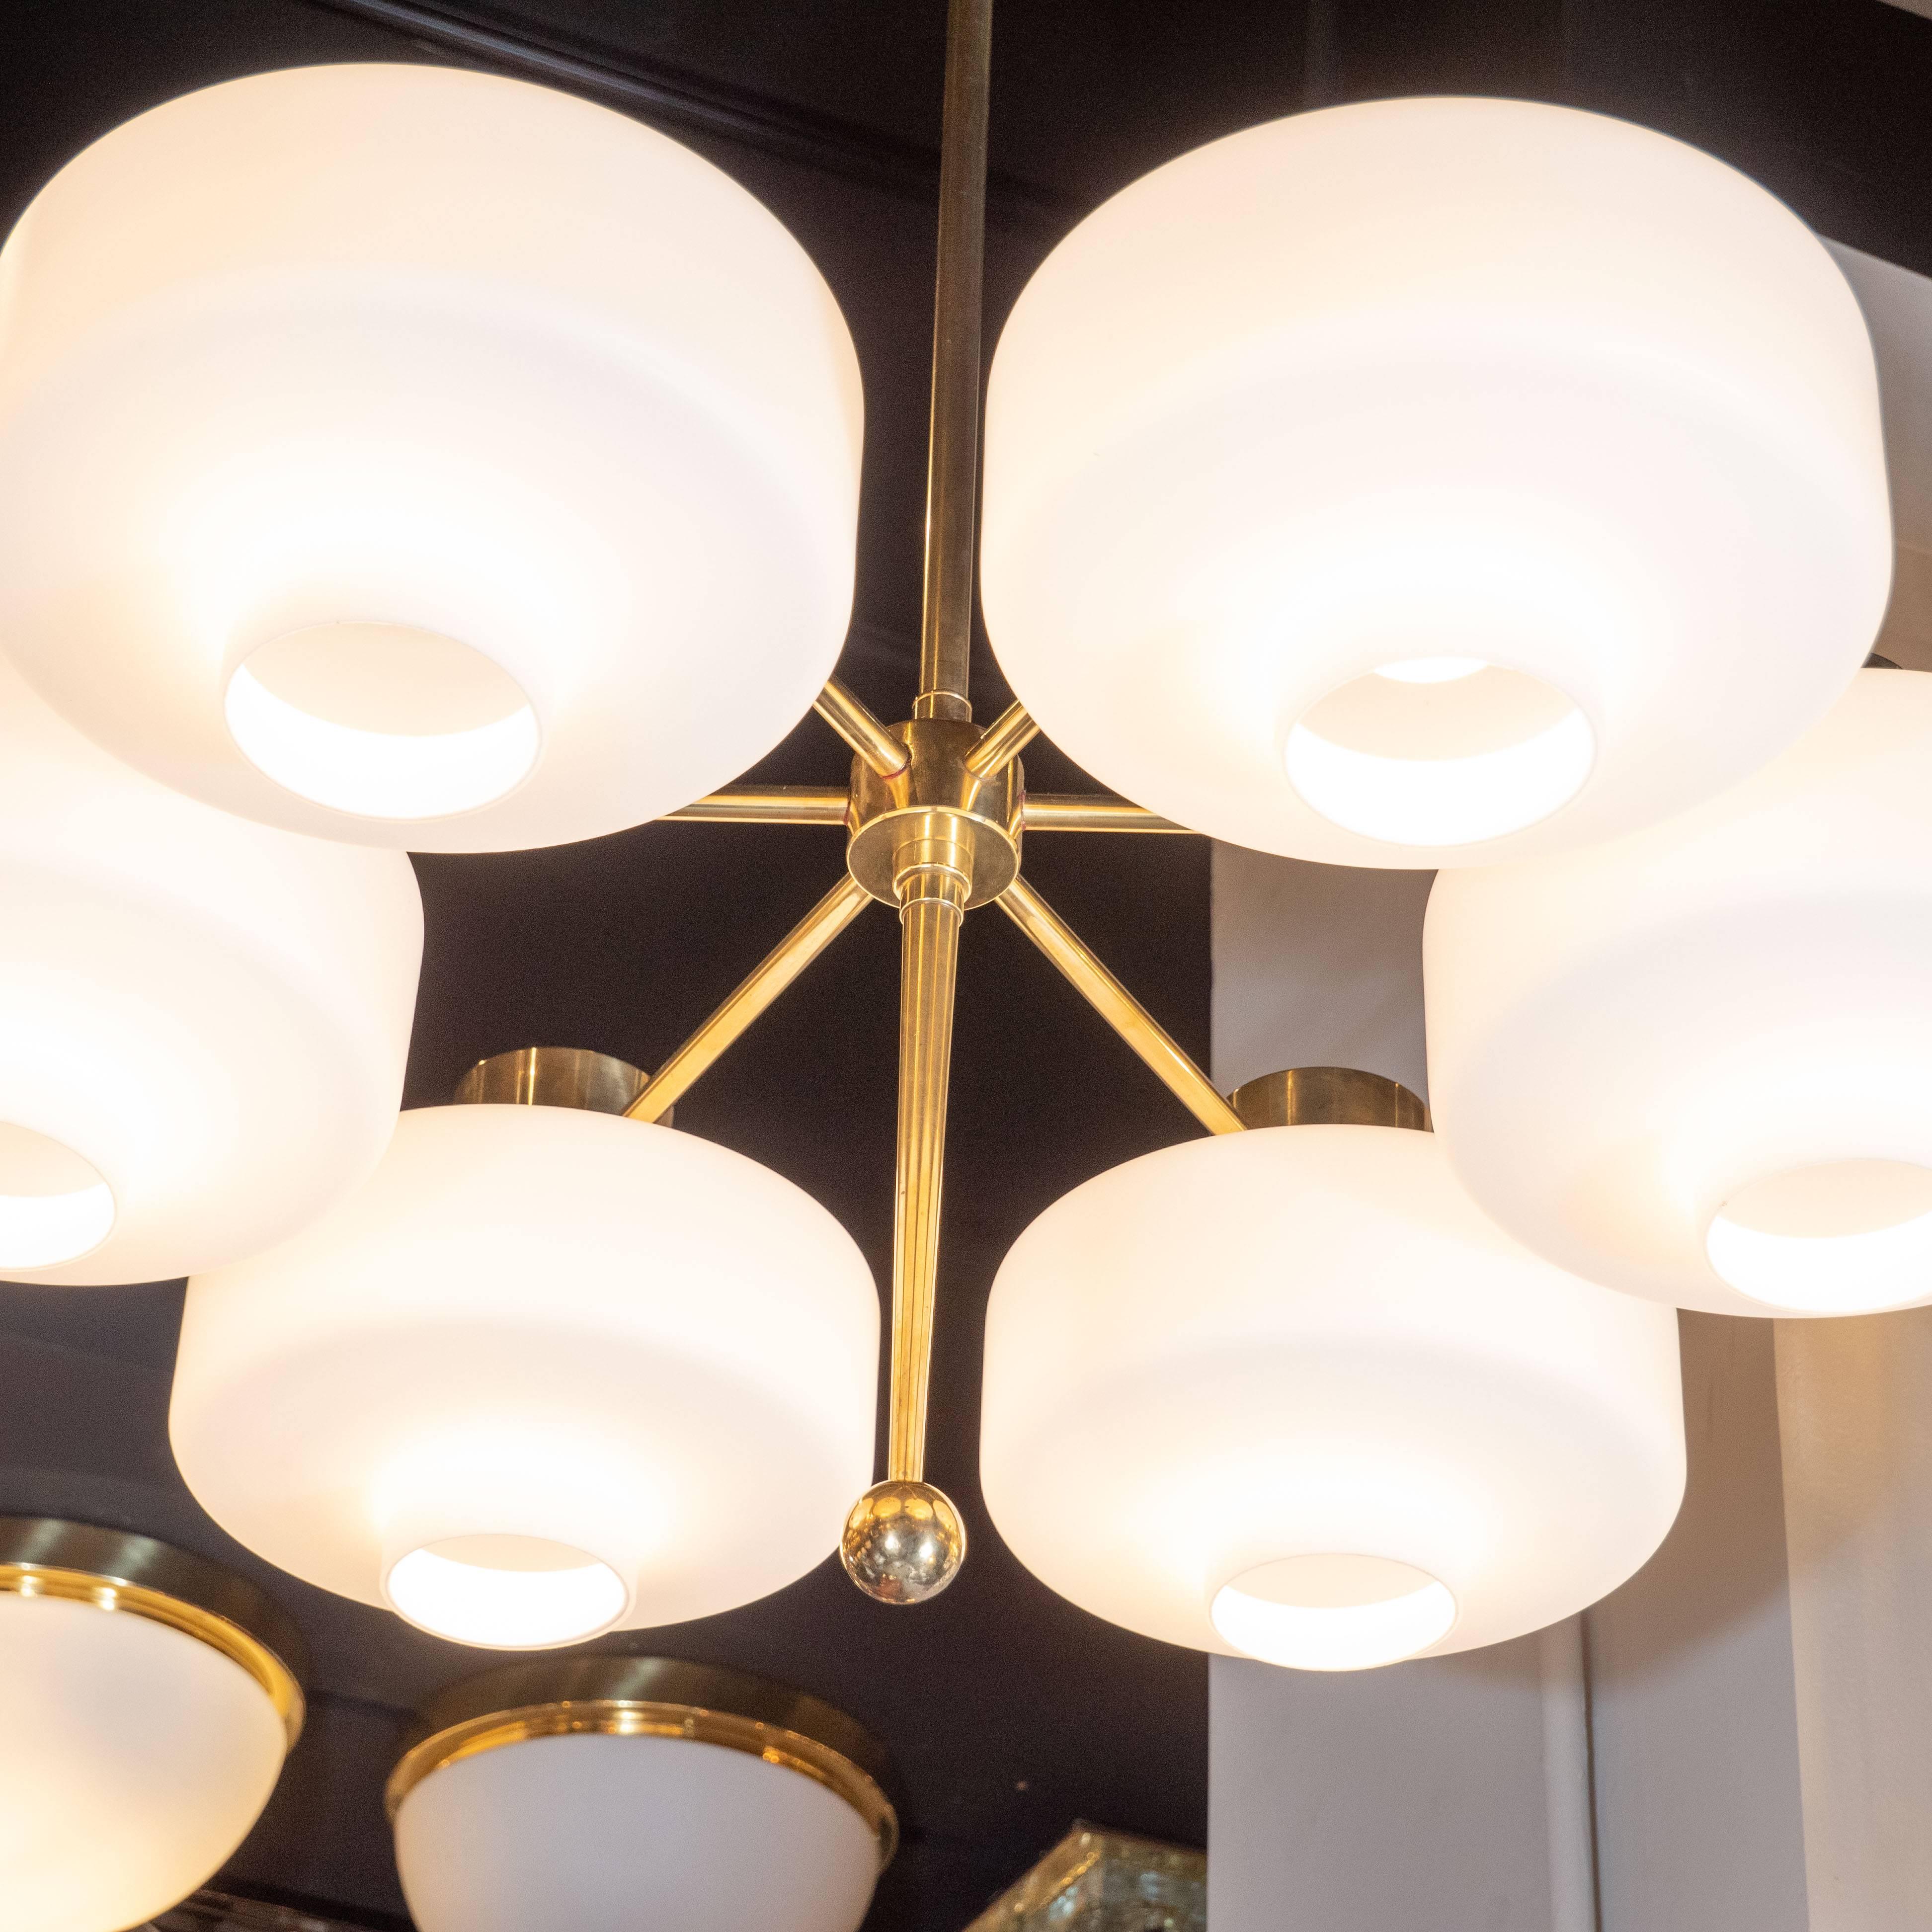 Swedish Scandinavian Mid-Century Modern Six-Arm Brass and Frosted White Glass Chandelier